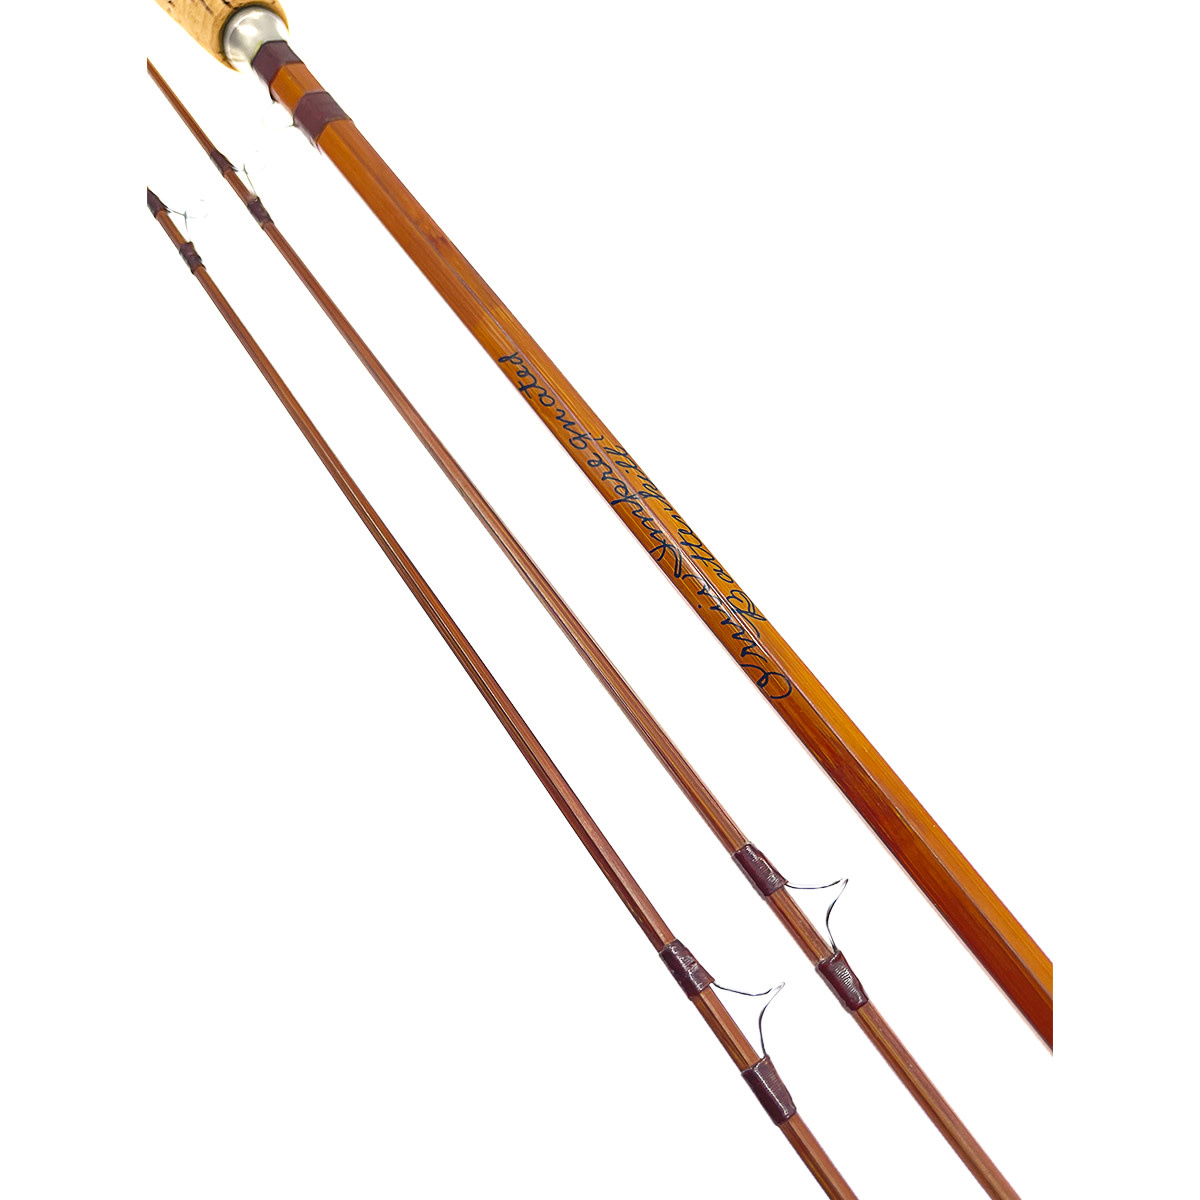 Orvis Battenkill Bamboo Fly Rod 7’ - 6 weight, 2pc. - Impregnated